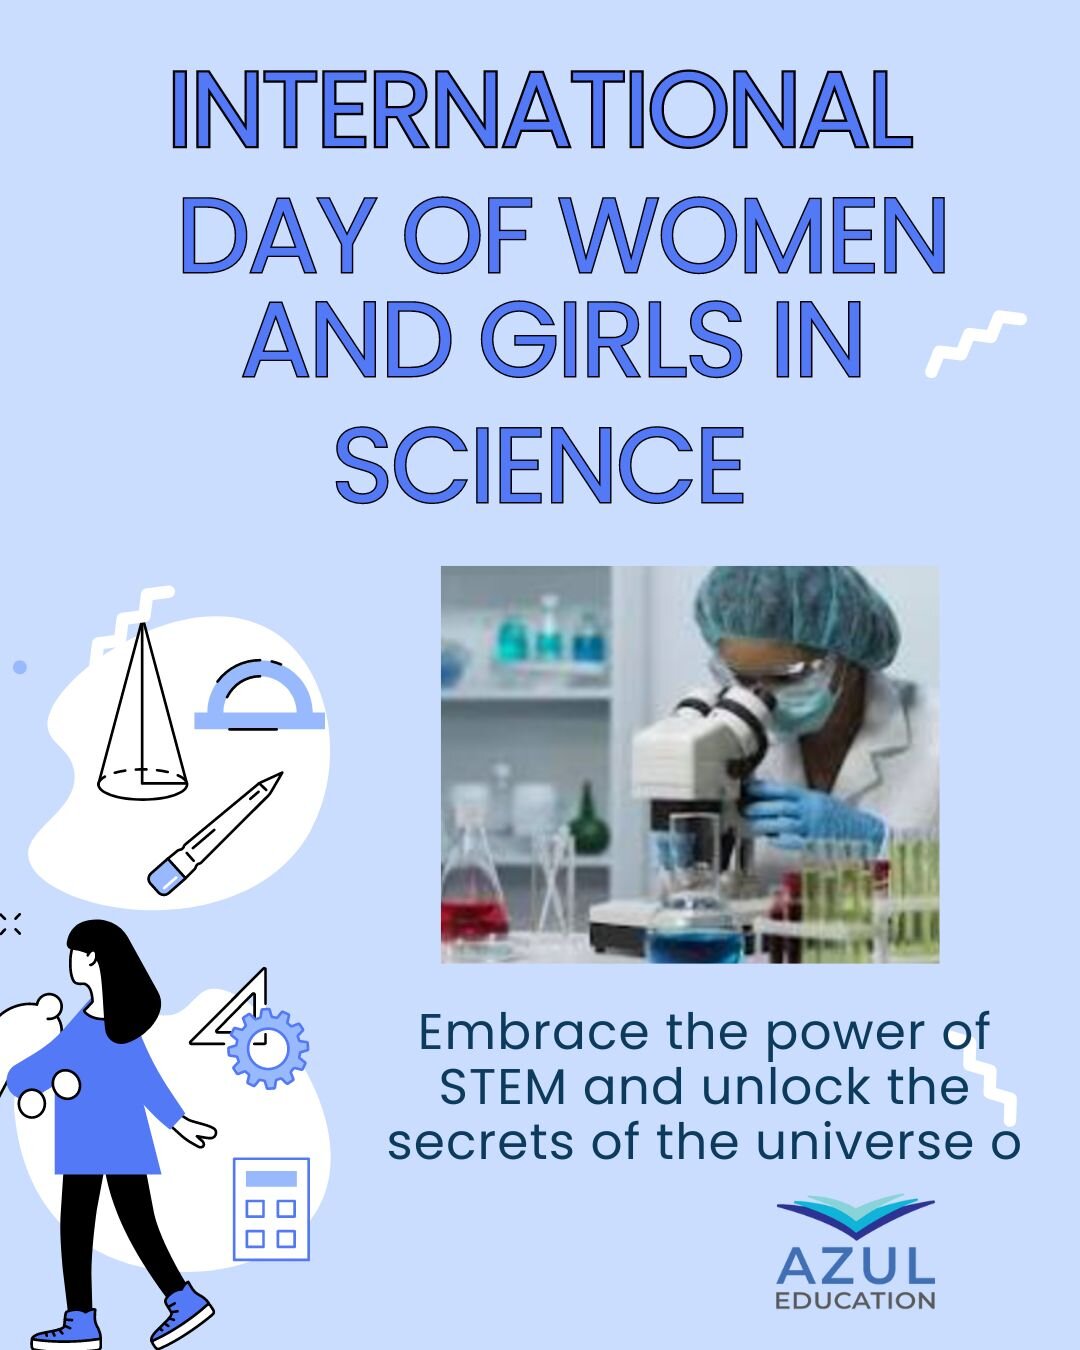 February 11, 2024

The International Day of Women and Girls in Science is an annual observance adopted by the United Nations General Assembly to promote the full and equal access and participation of women in Science, Technology, Engineering and Math